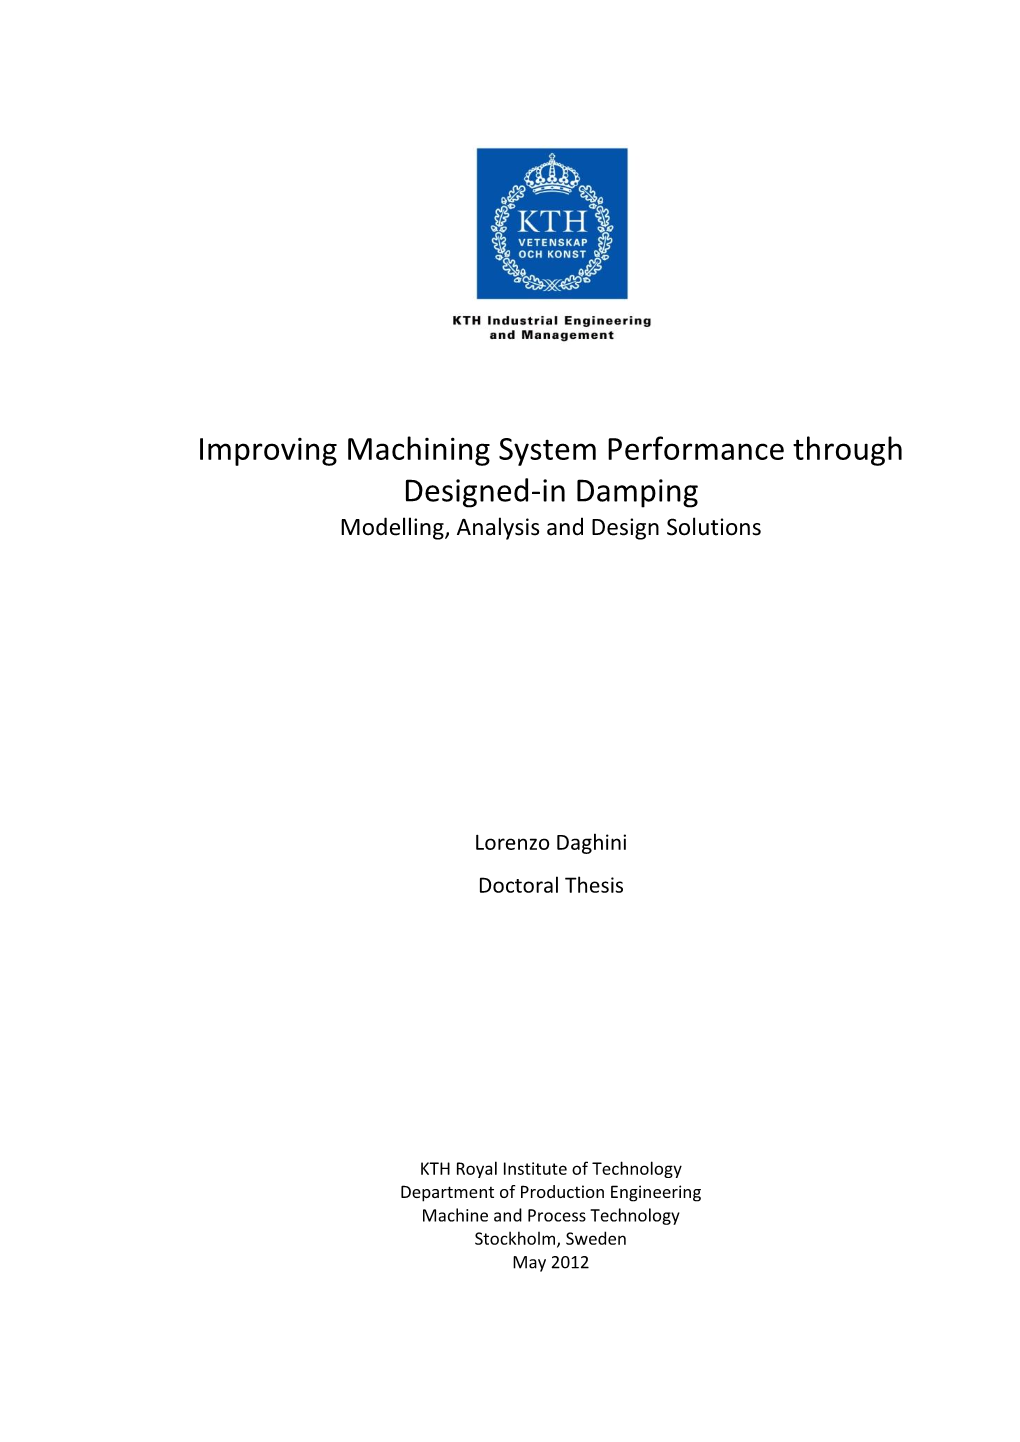 Improving Machining System Performance Through Designed-In Damping Modelling, Analysis and Design Solutions